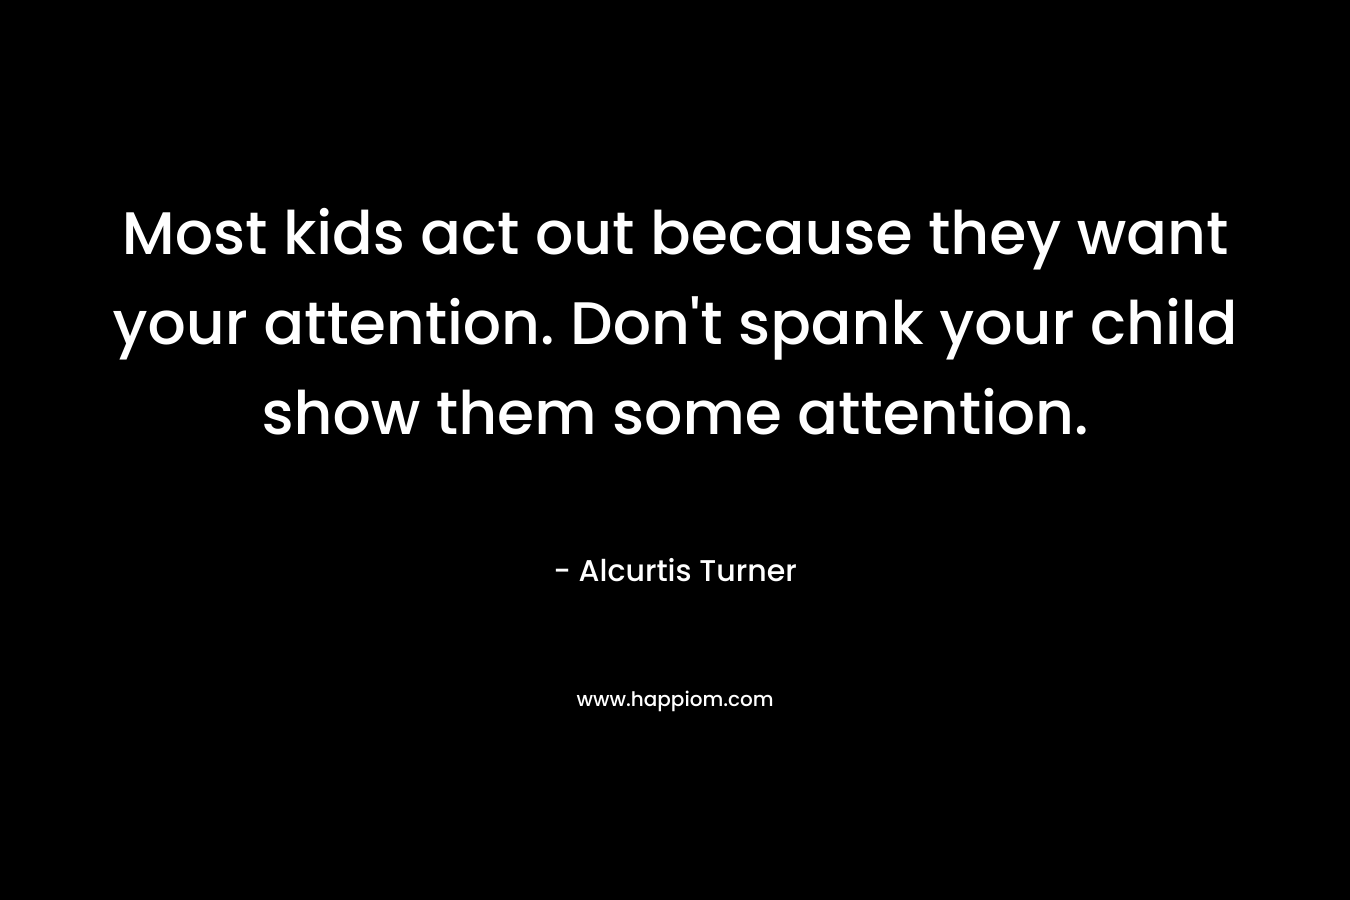 Most kids act out because they want your attention. Don't spank your child show them some attention.